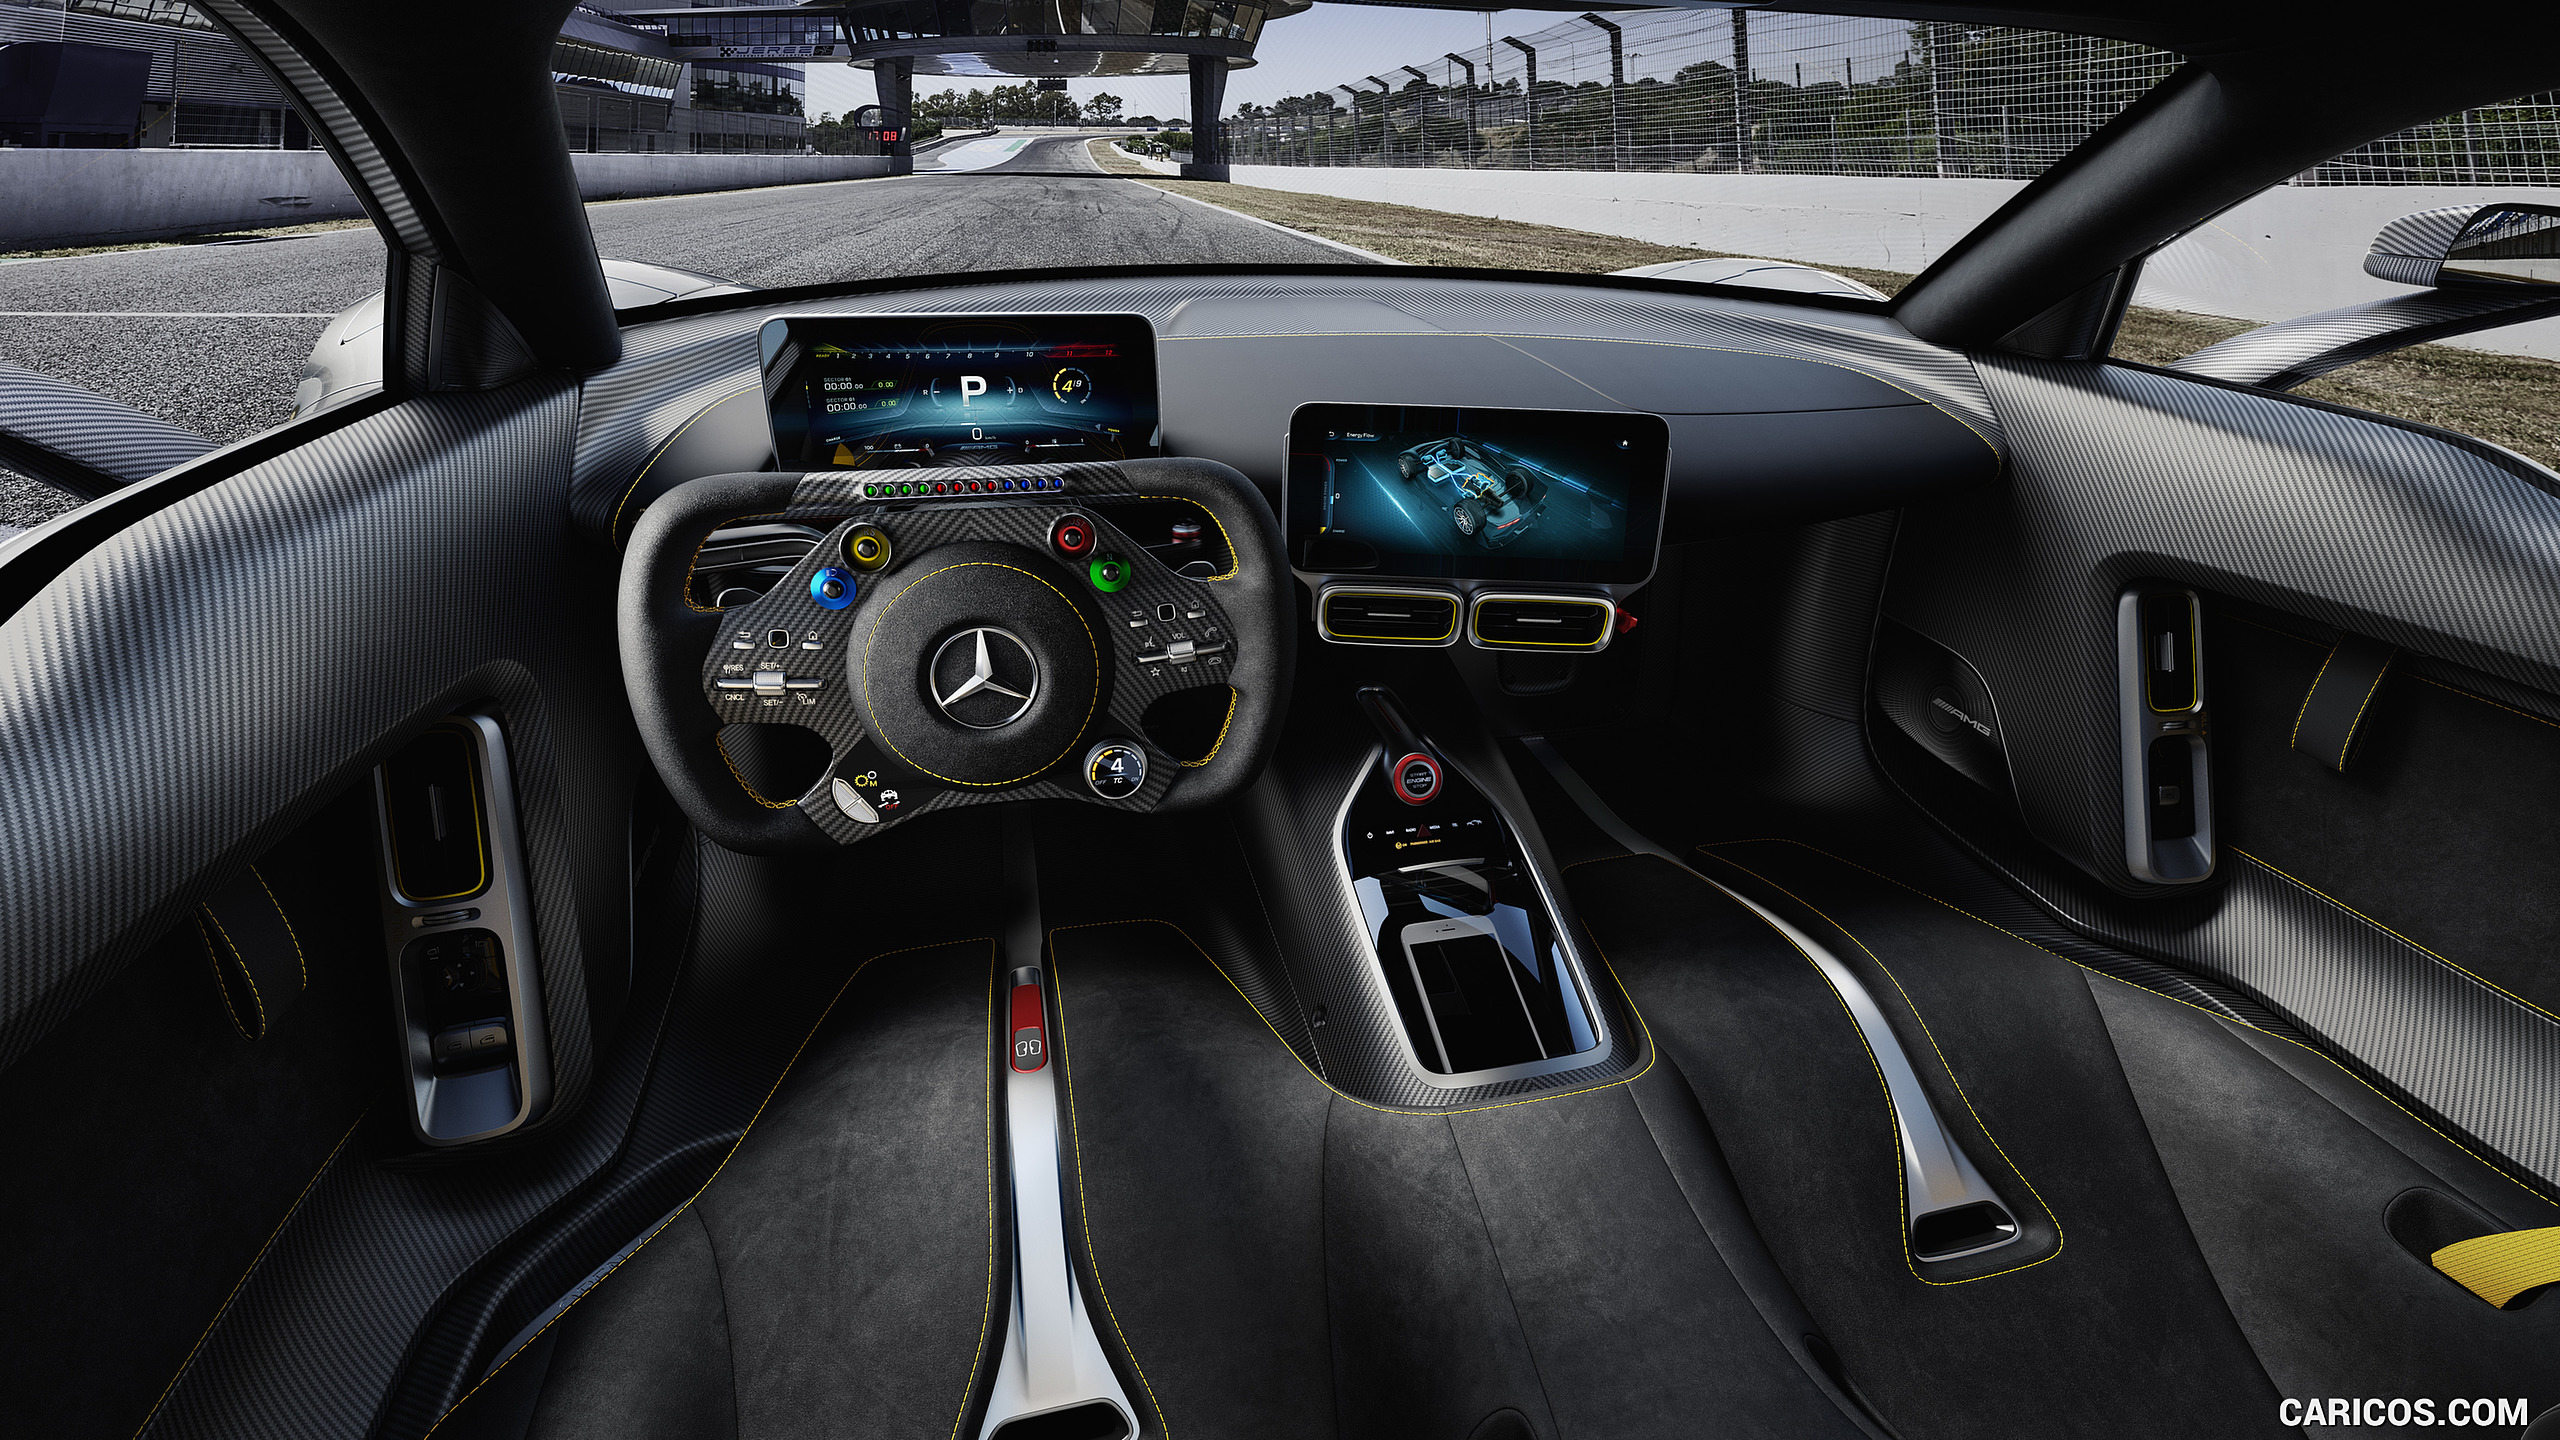 2017 Mercedes-AMG Project ONE - Interior, #12 of 13